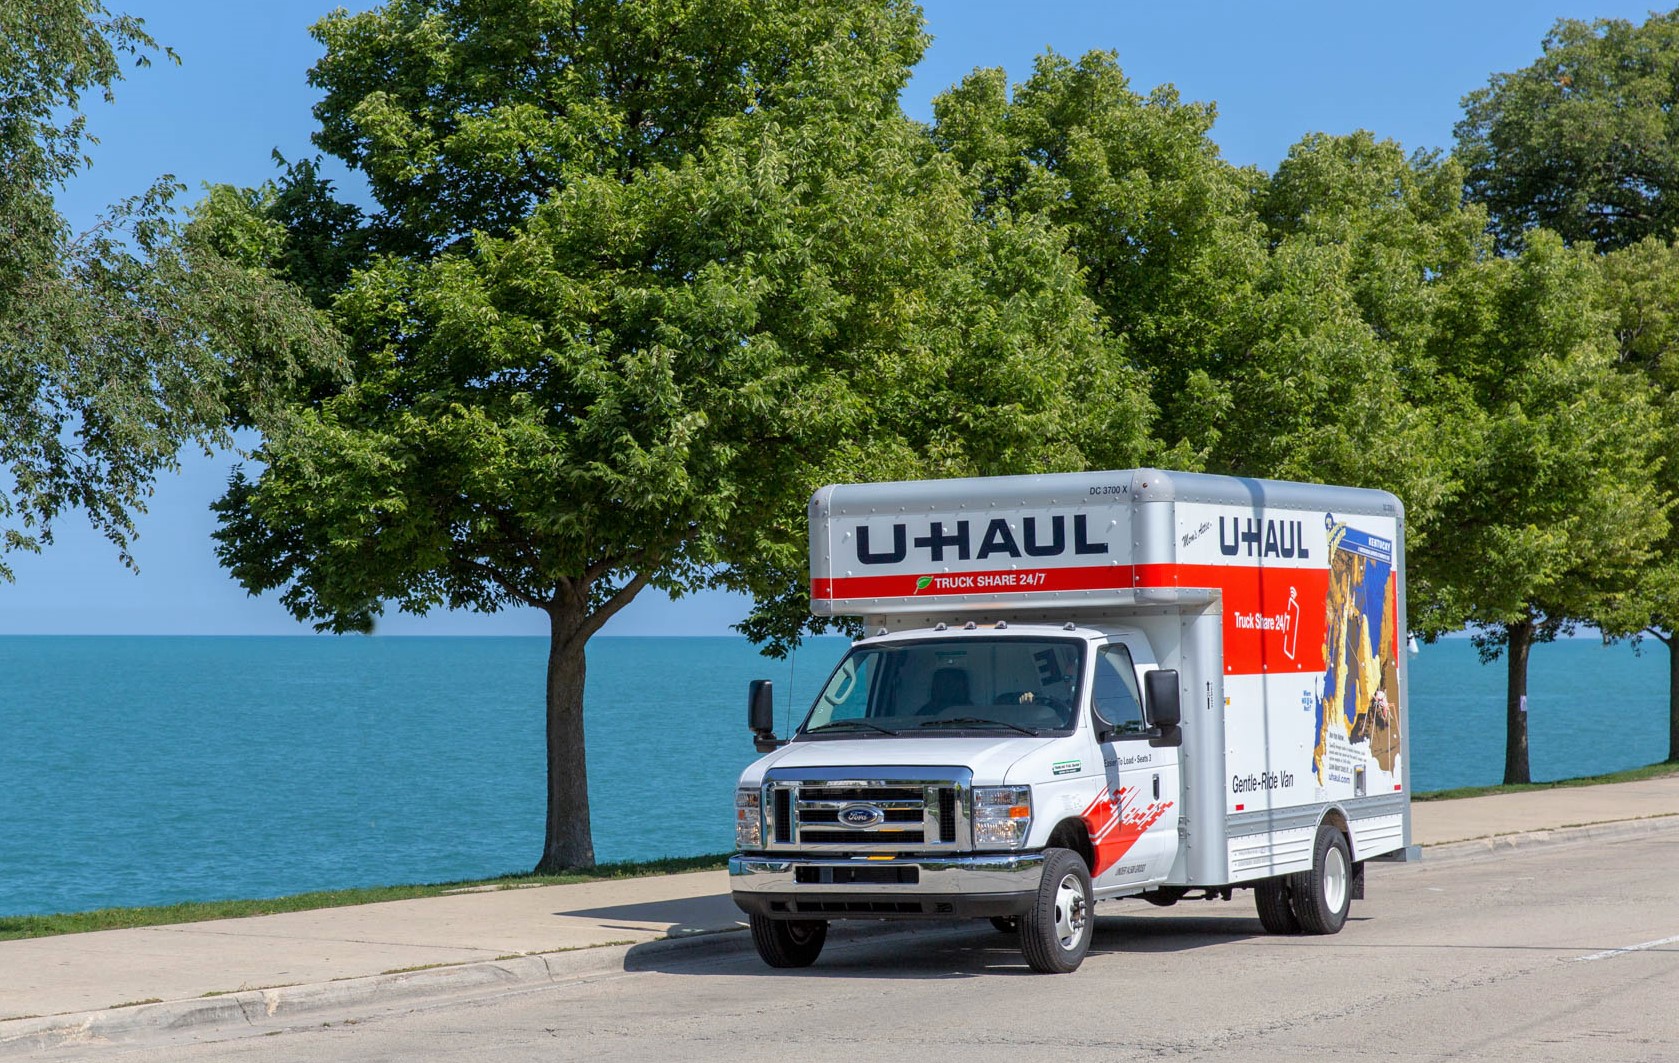 FLORIDA is U-Haul No. 1 Growth State for 2019